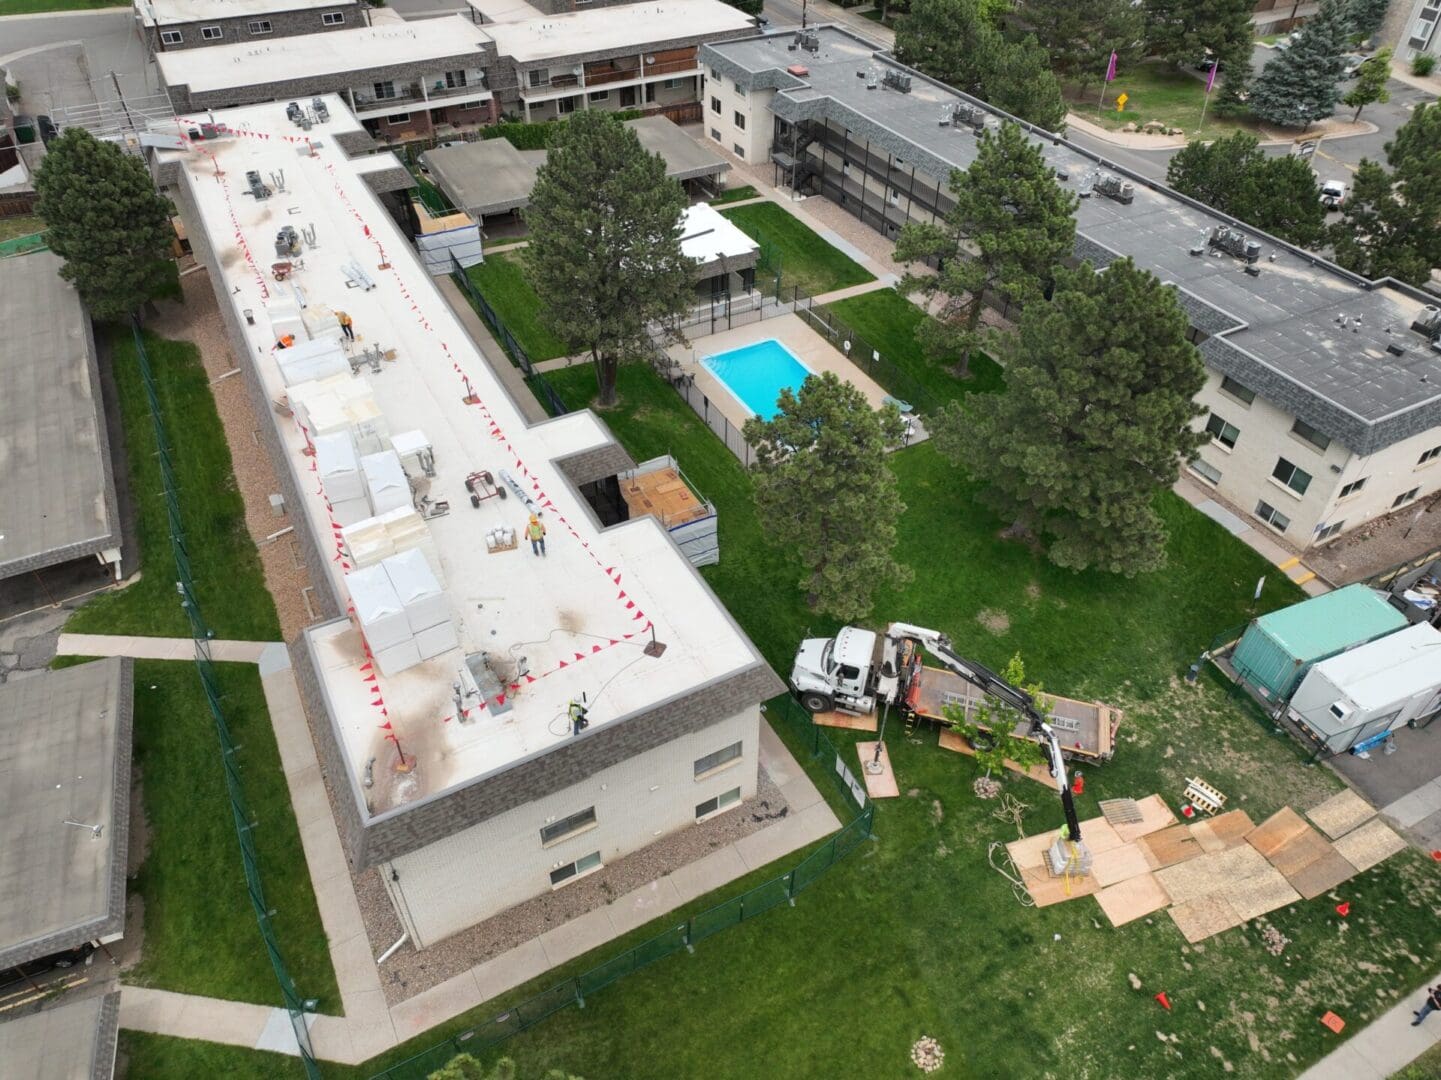 aerial view of building being constructed with swimming pool